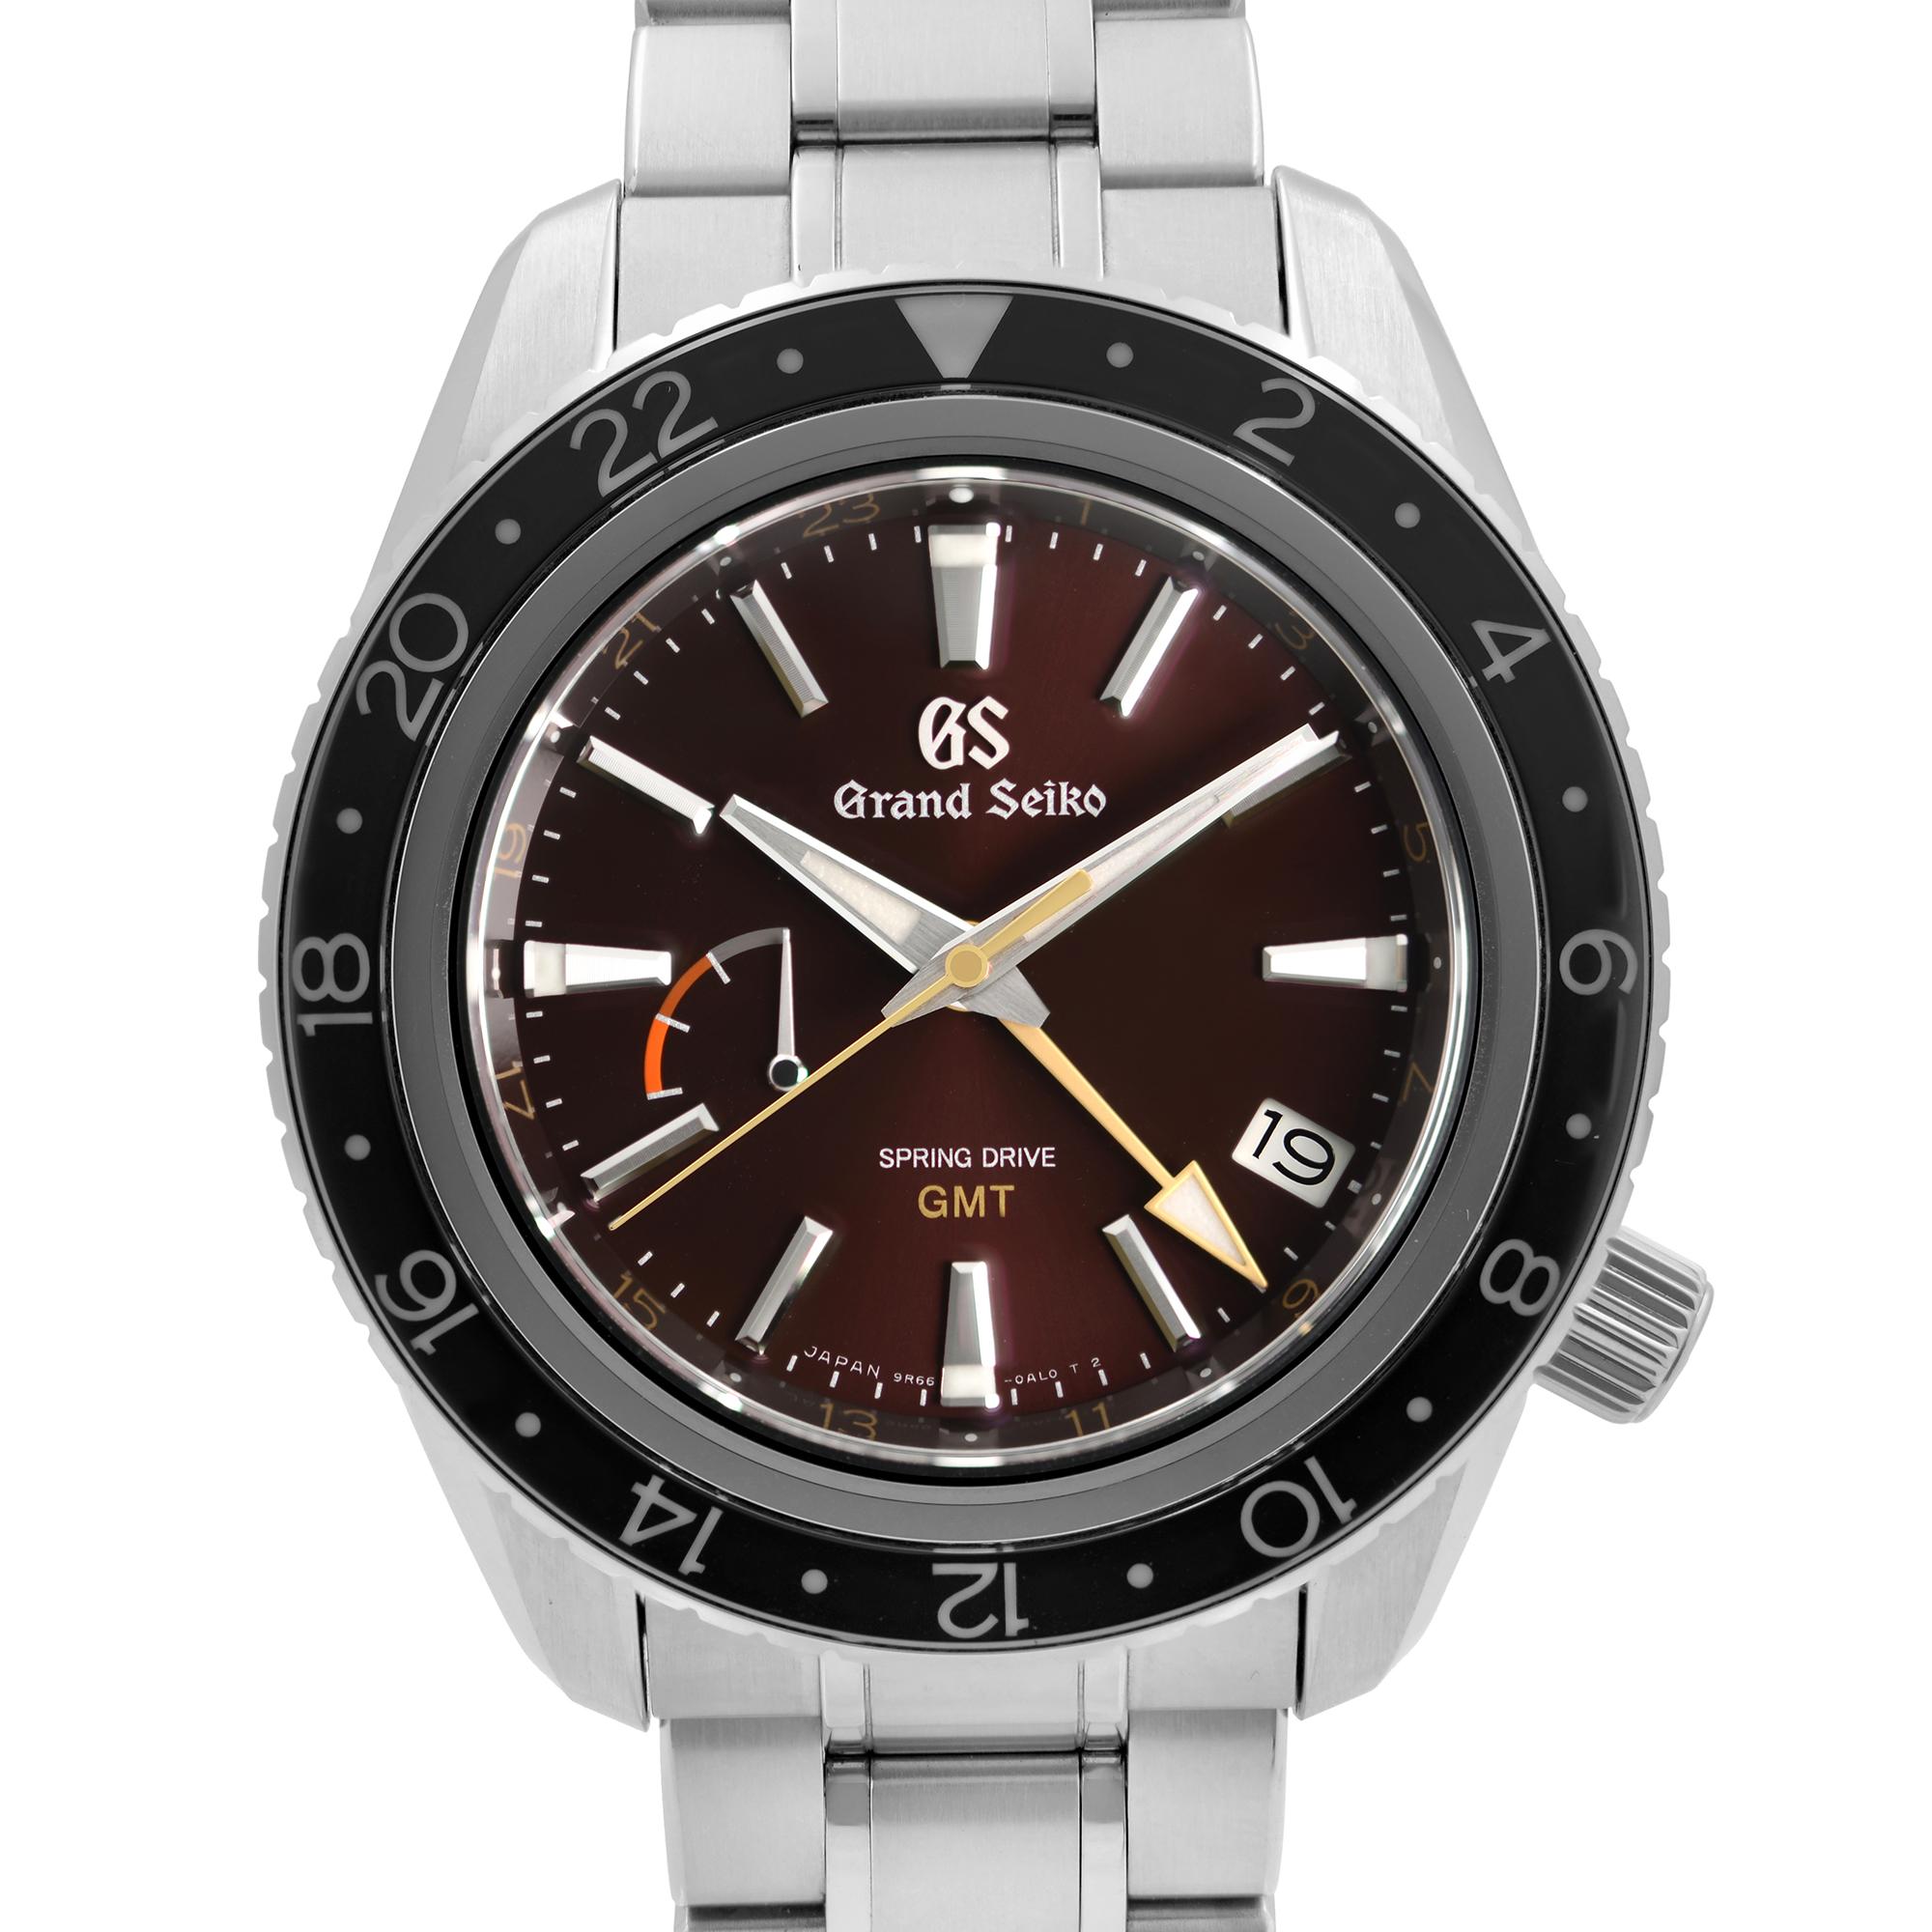 Display Model Grand Seiko GMT Steel Limited Edition Burgundy Dial Spring Drive Watch SBGE245. Limited edition to 600 Pcs. This is Edition No-051 out of 600. This Beautiful Timepiece is Powered by Spring Dive (Automatic) Movement And Features: Round